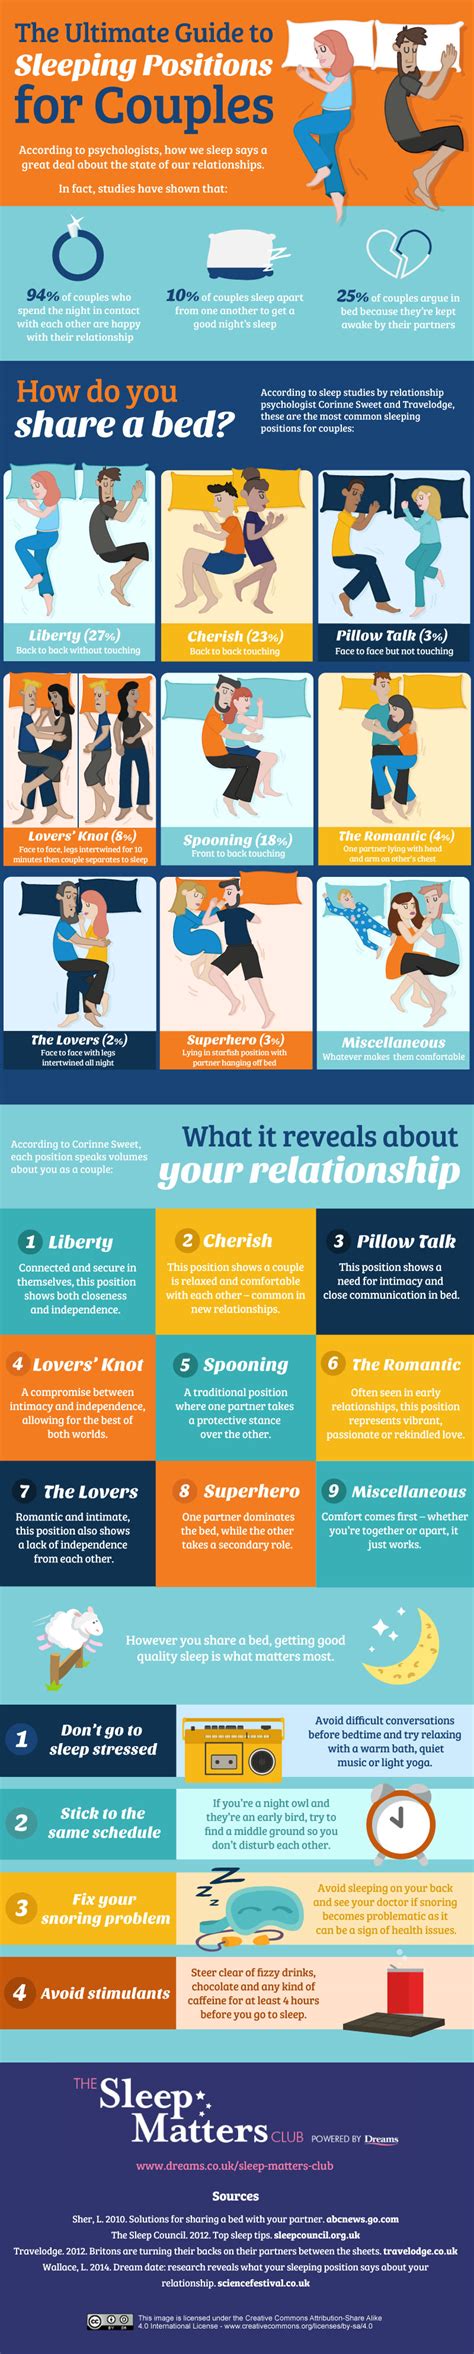 the ultimate guide to sleeping positions for couples [infographic]